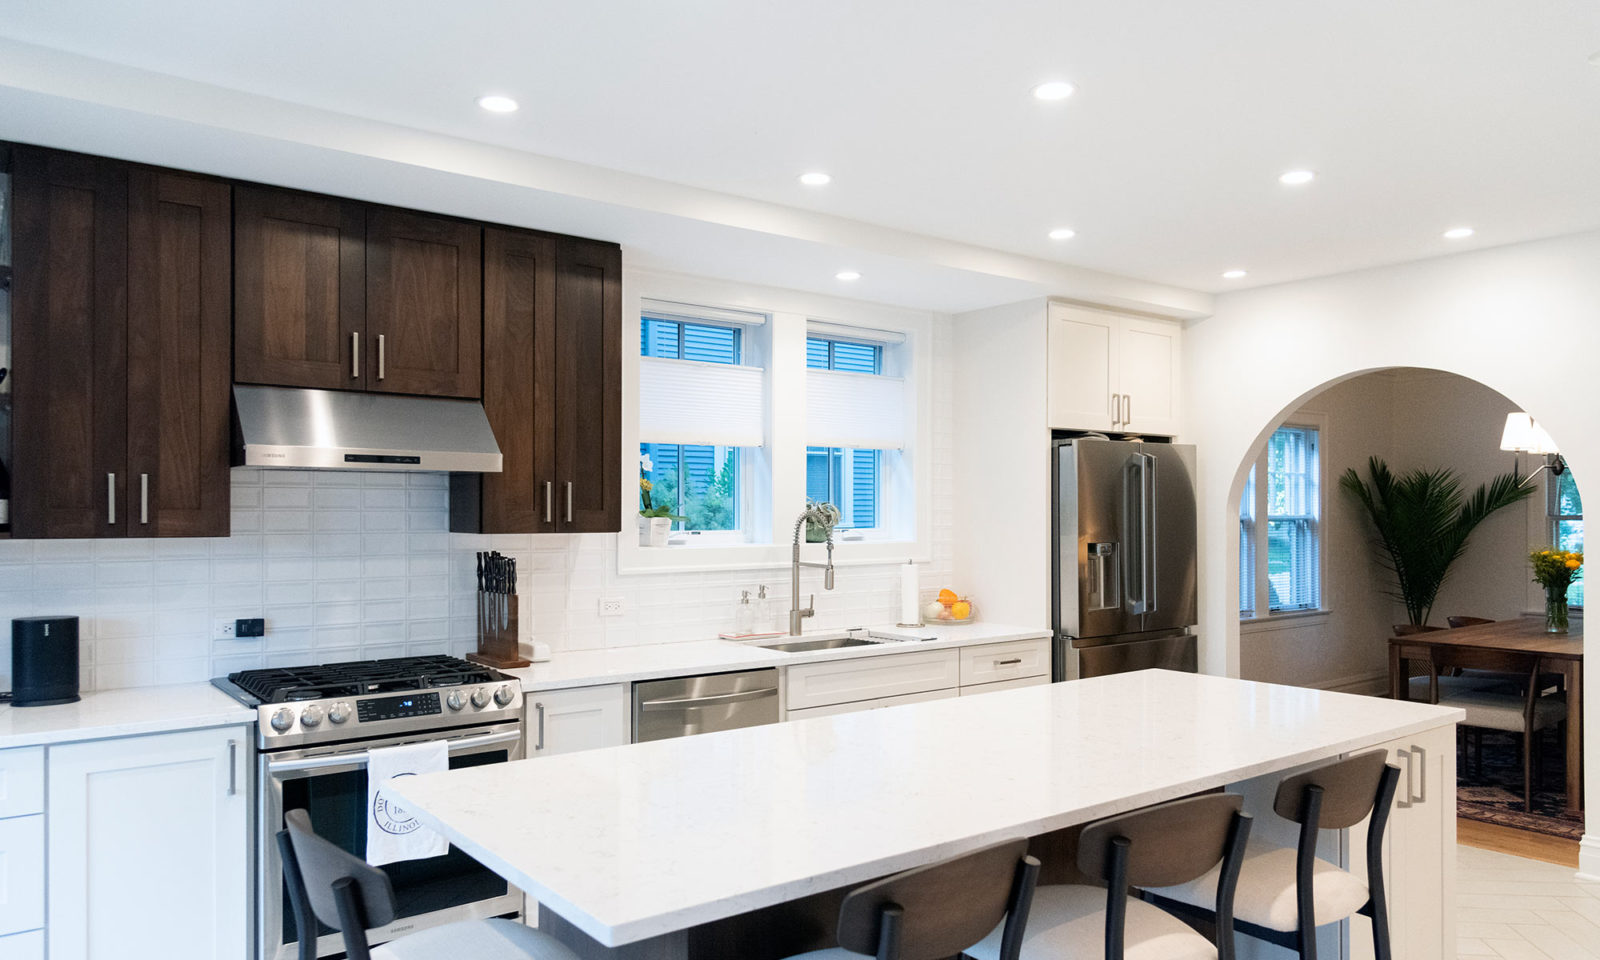 Newly renovated kitchen with white and dark wooden features